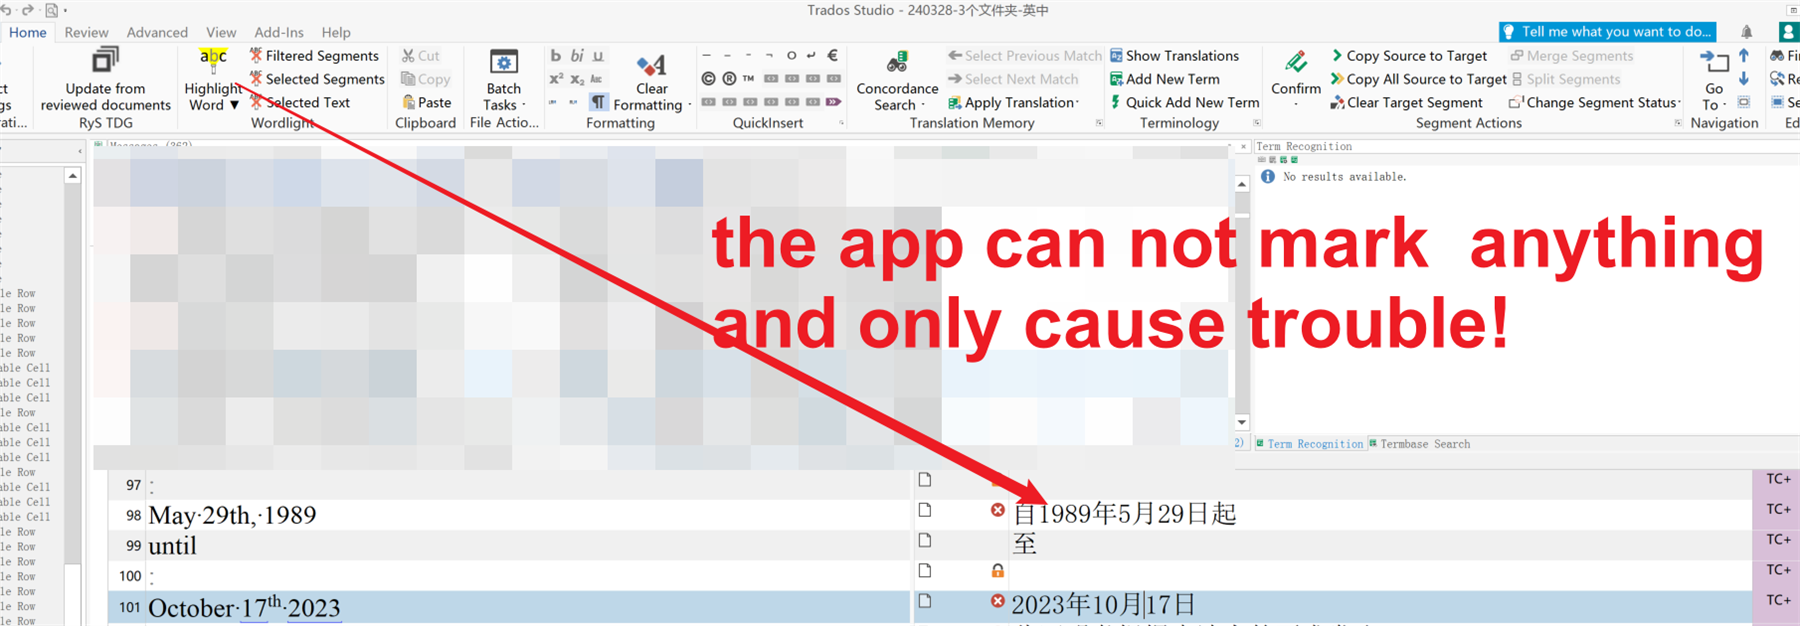 Screenshot of Trados Studio interface with an error message overlay stating 'the app can not mark anything and only cause trouble!' indicating a malfunction with the 'wordlight' application.